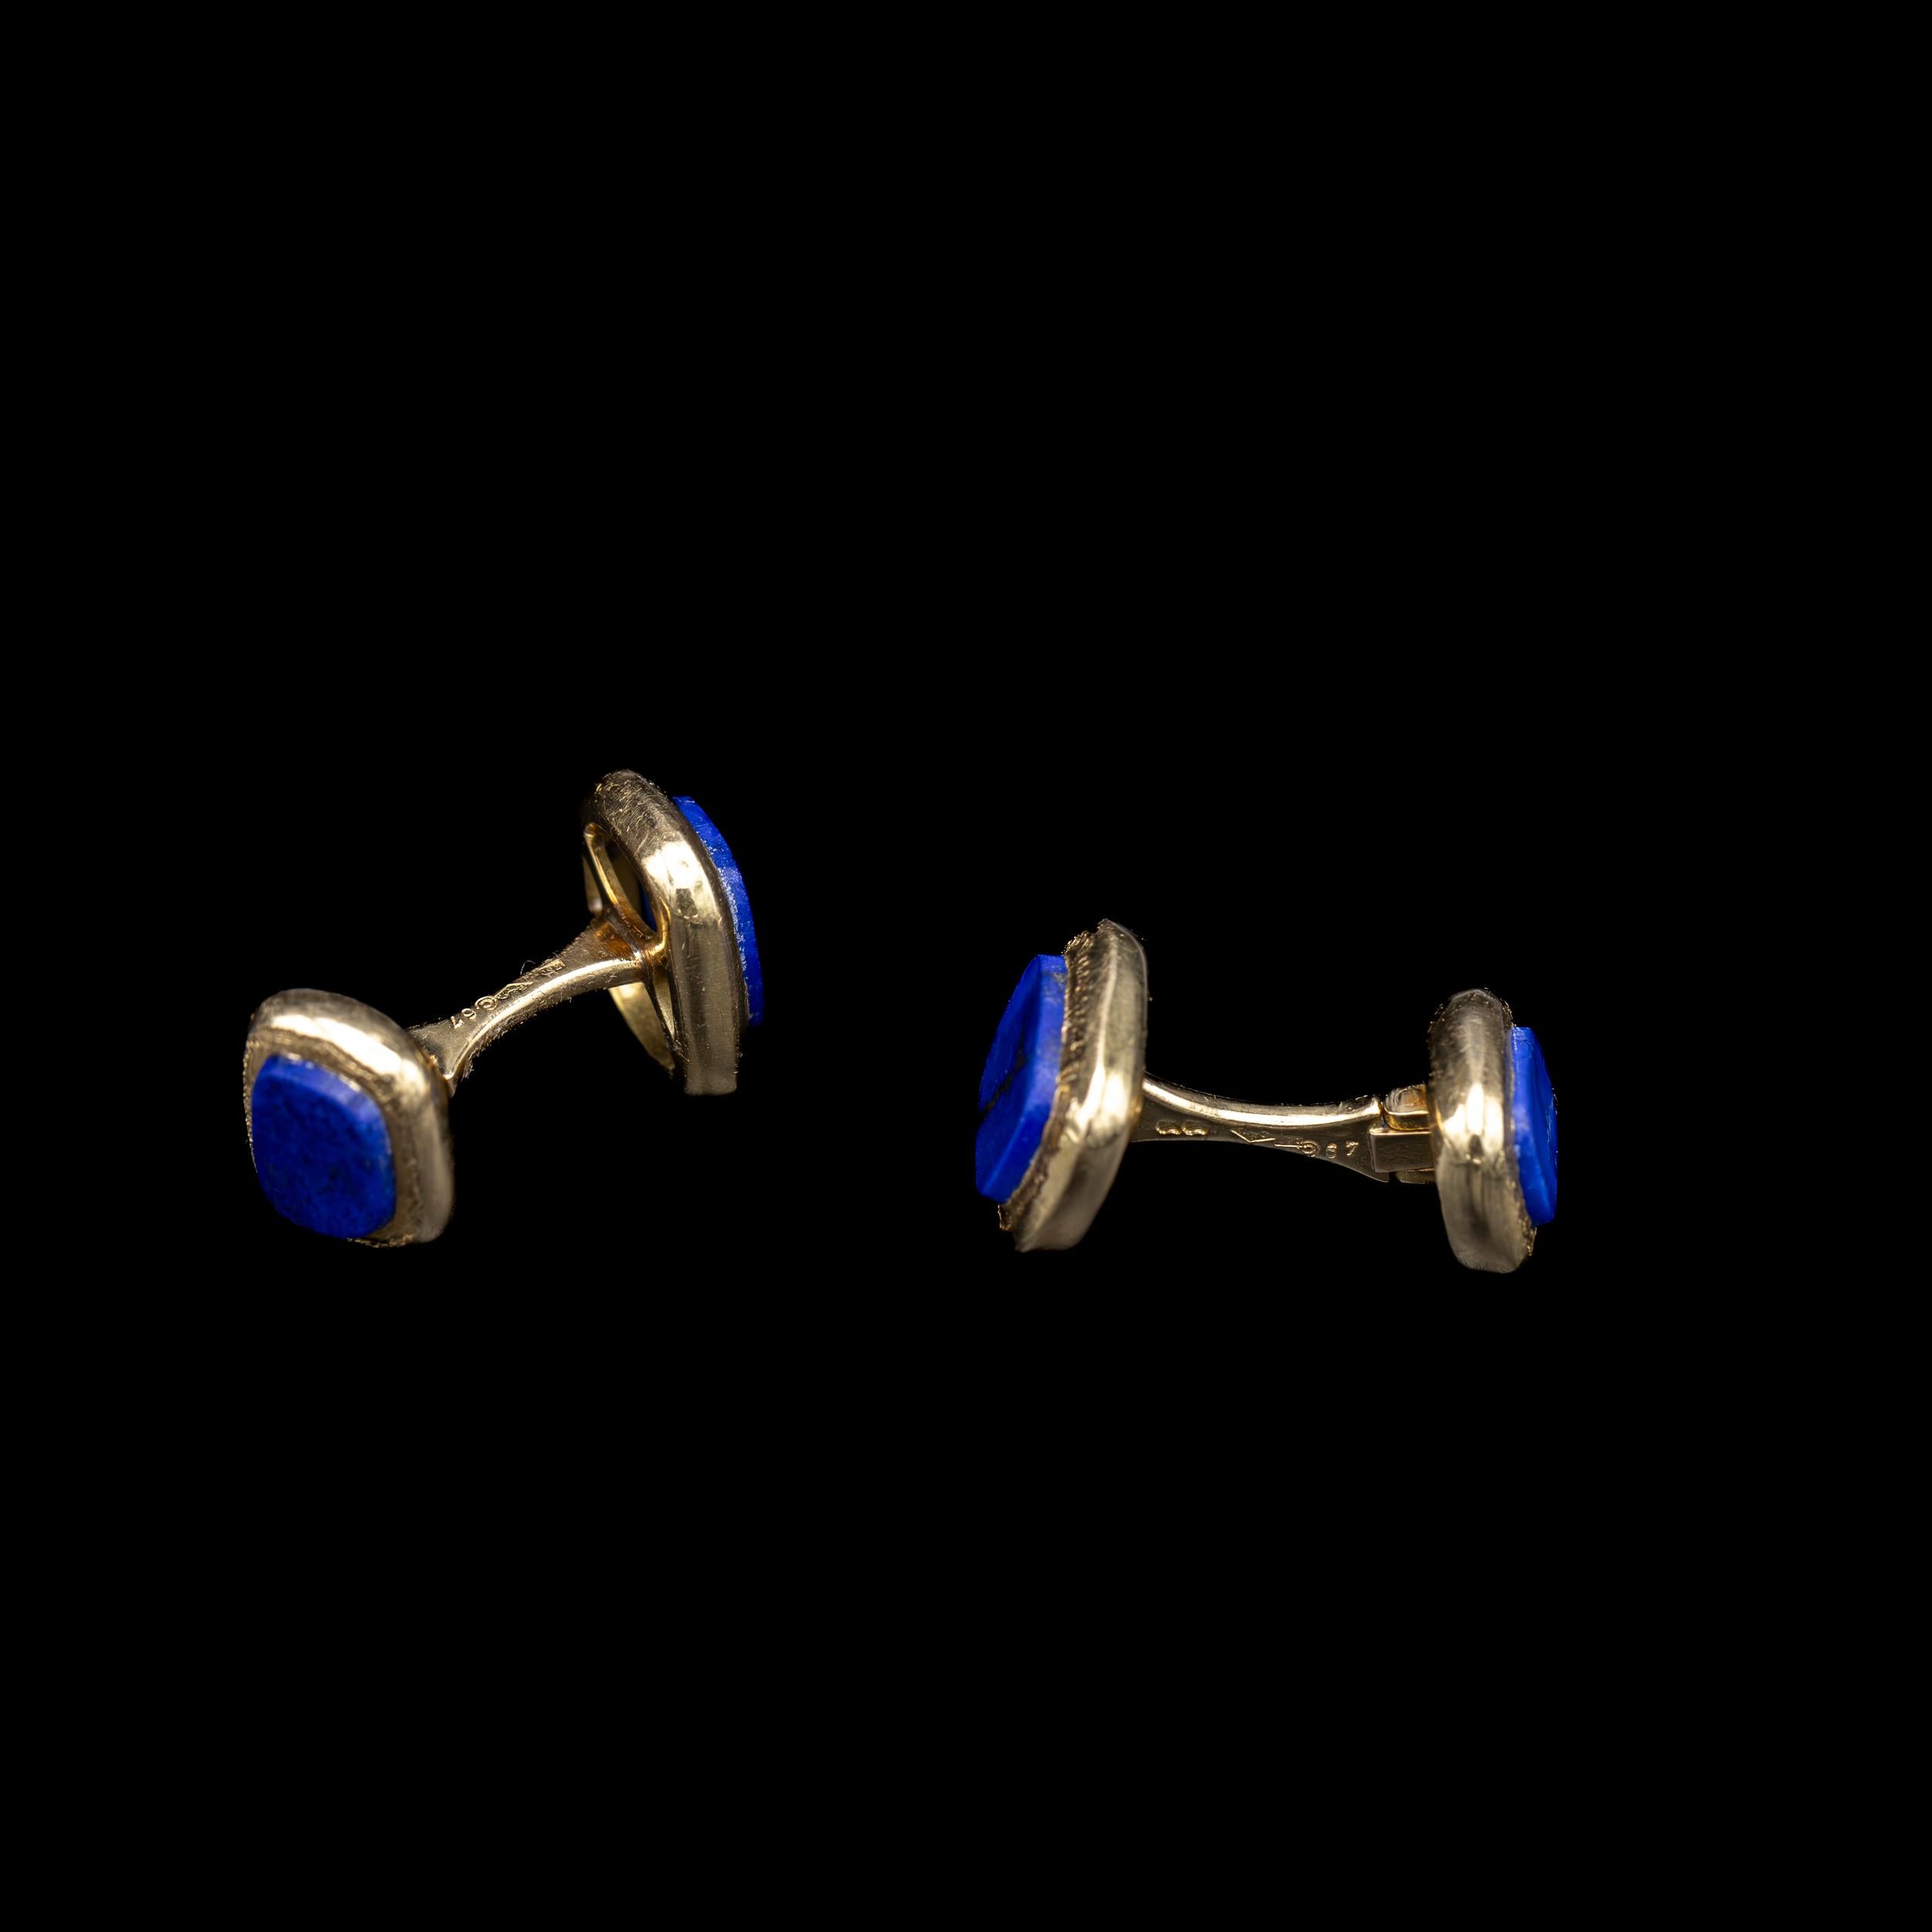 VCA Van Cleef & Arpels Georges Lenfant Lapis Lazuli Yellow Gold Cufflinks 1960s In Good Condition For Sale In Lisbon, PT